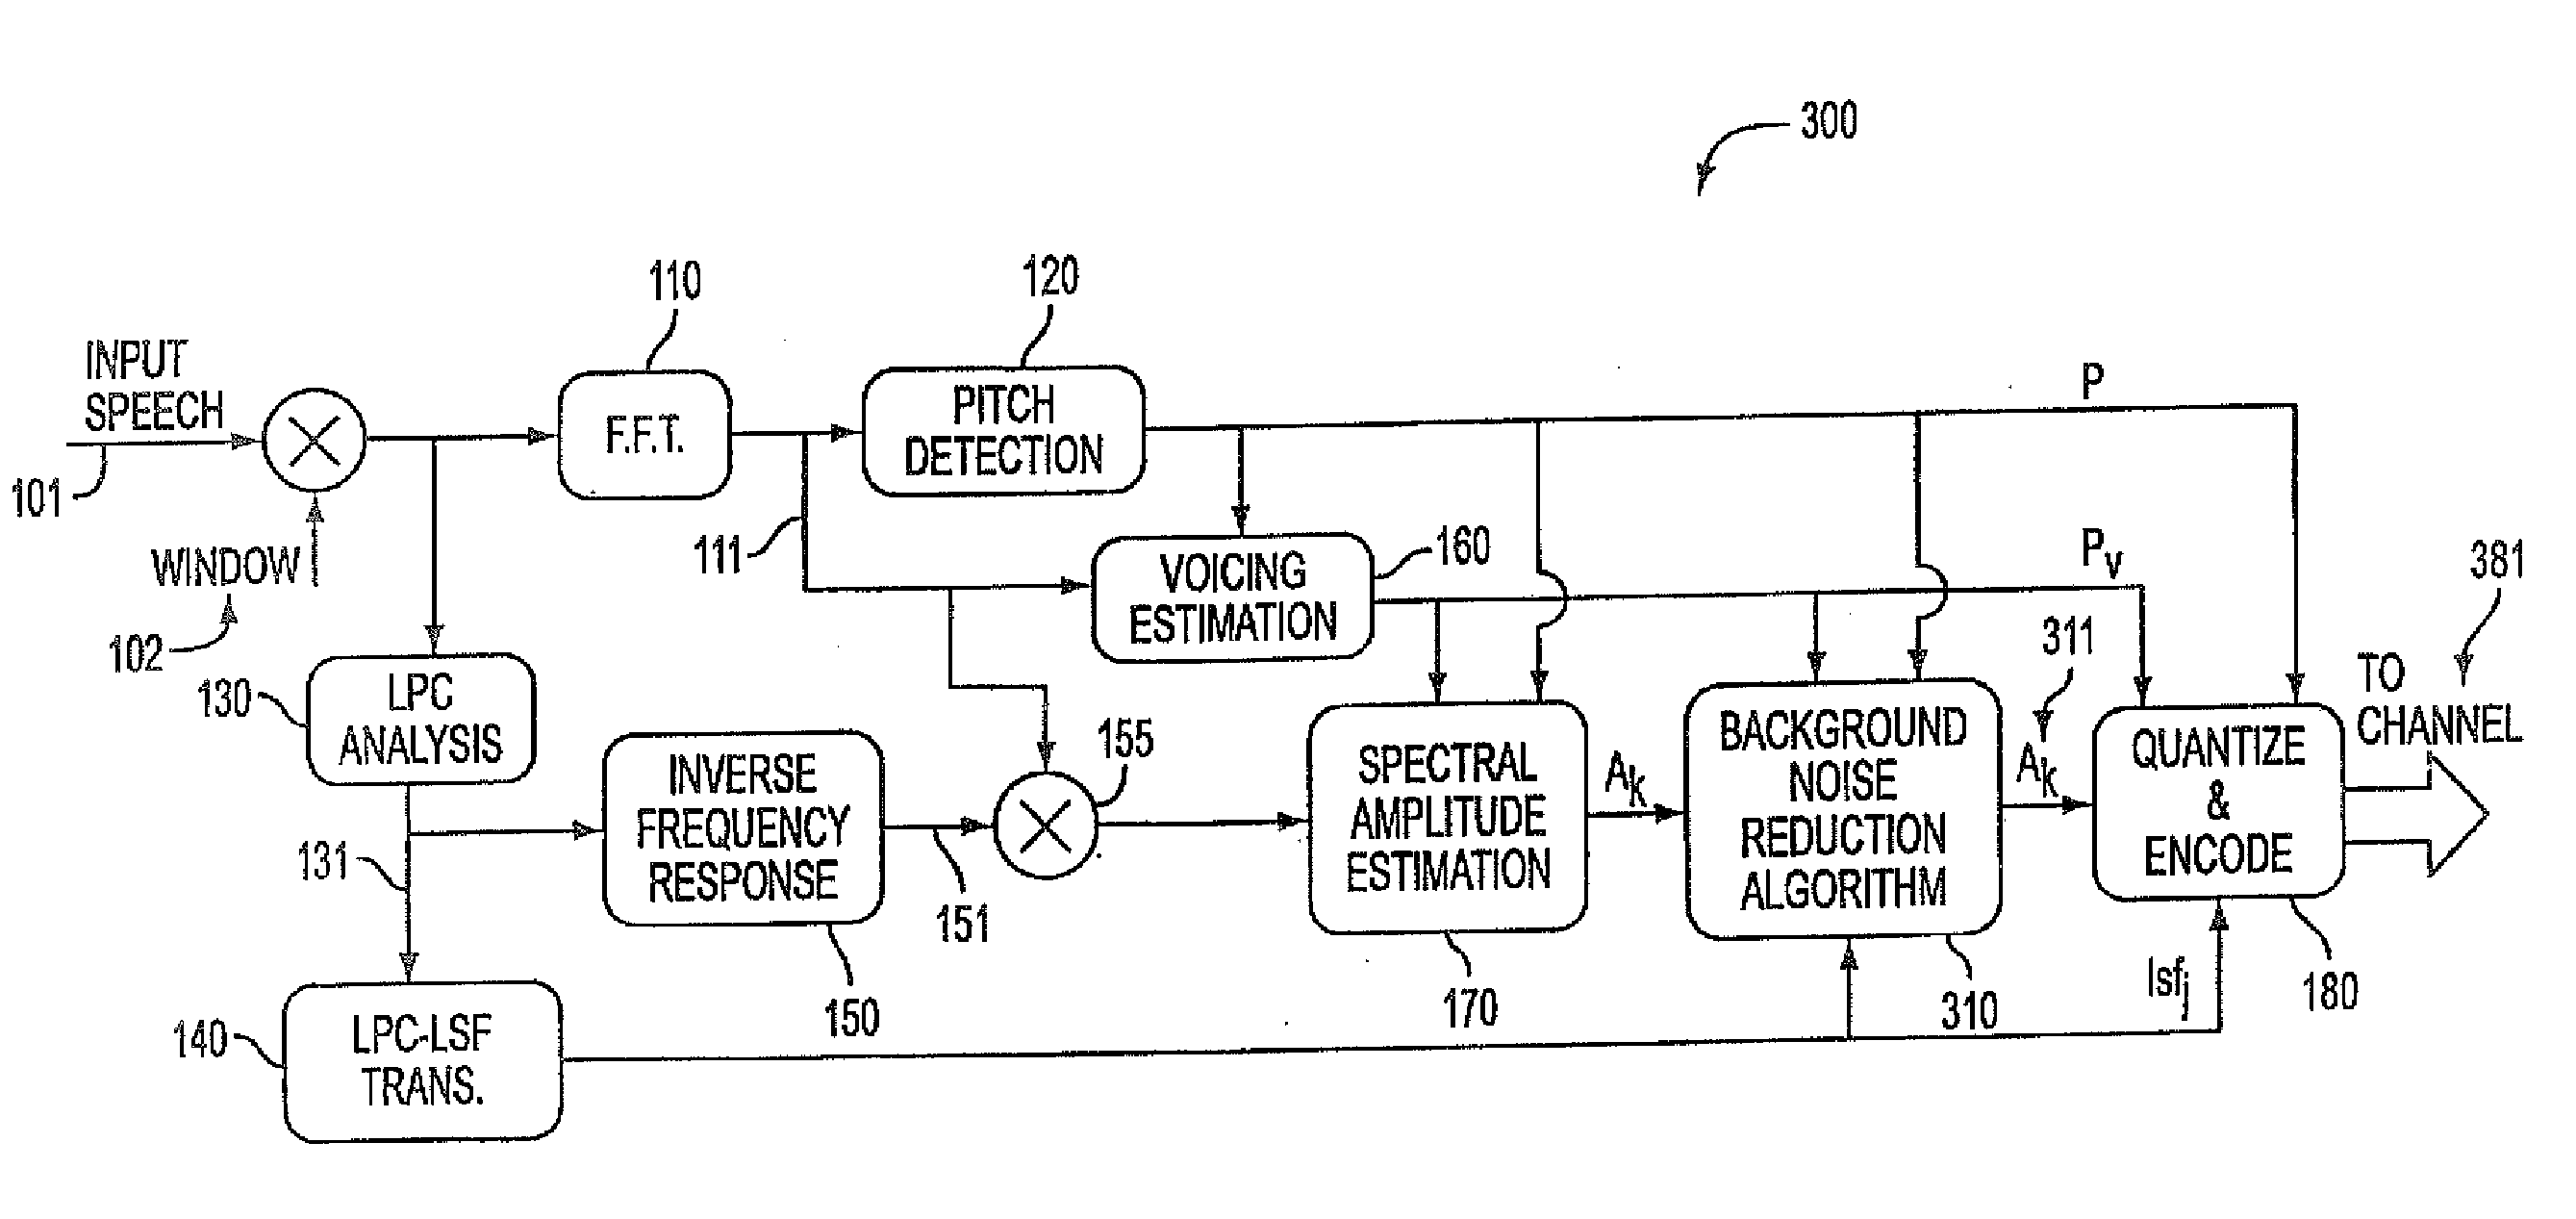 Background noise reduction in sinusoidal based speech coding systems